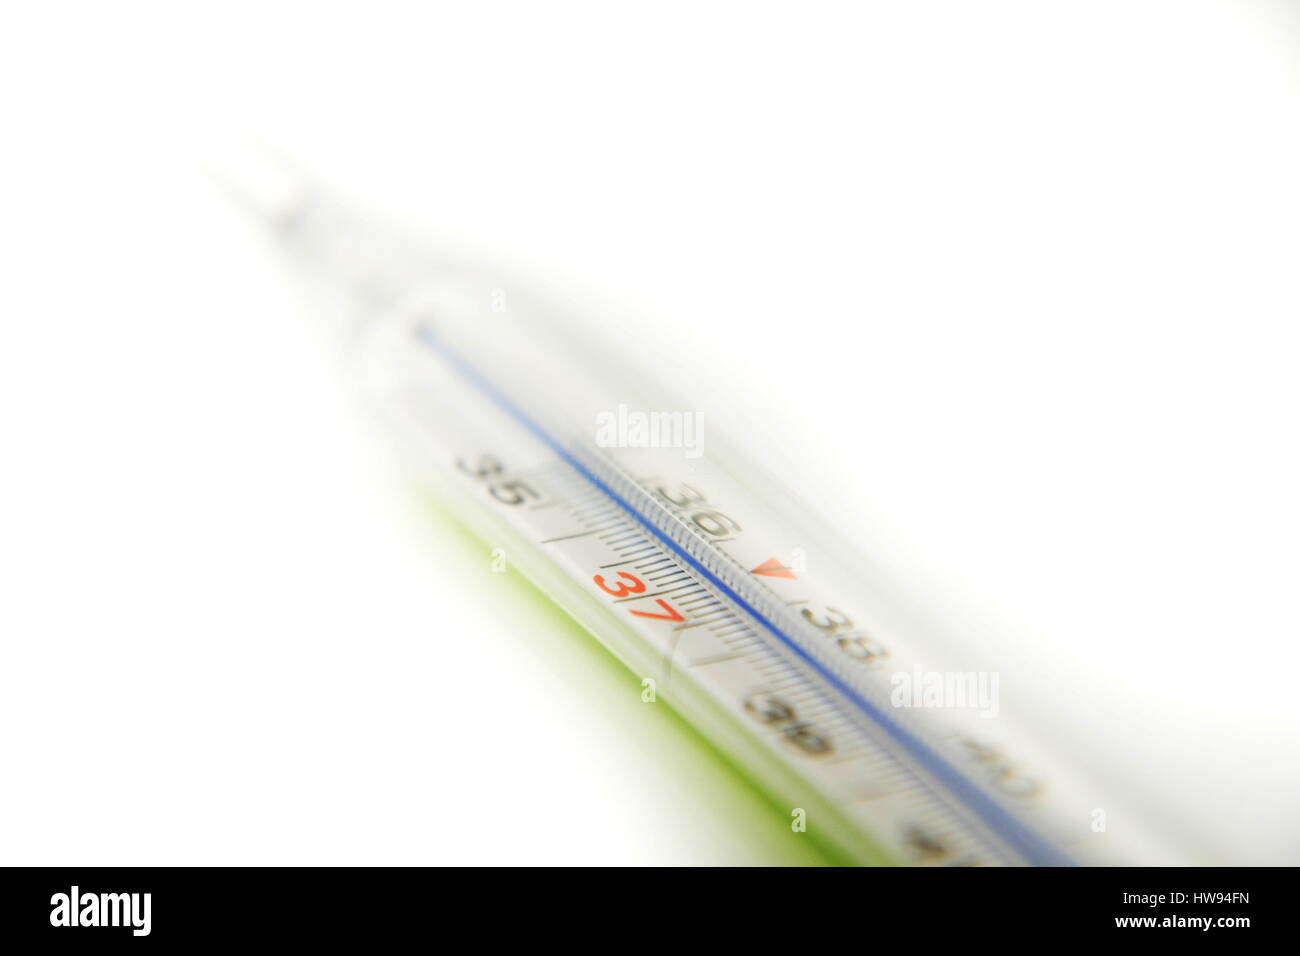 Medical thermometer indicating temperature 37.8 Celsius degrees isolated on white Stock Photo